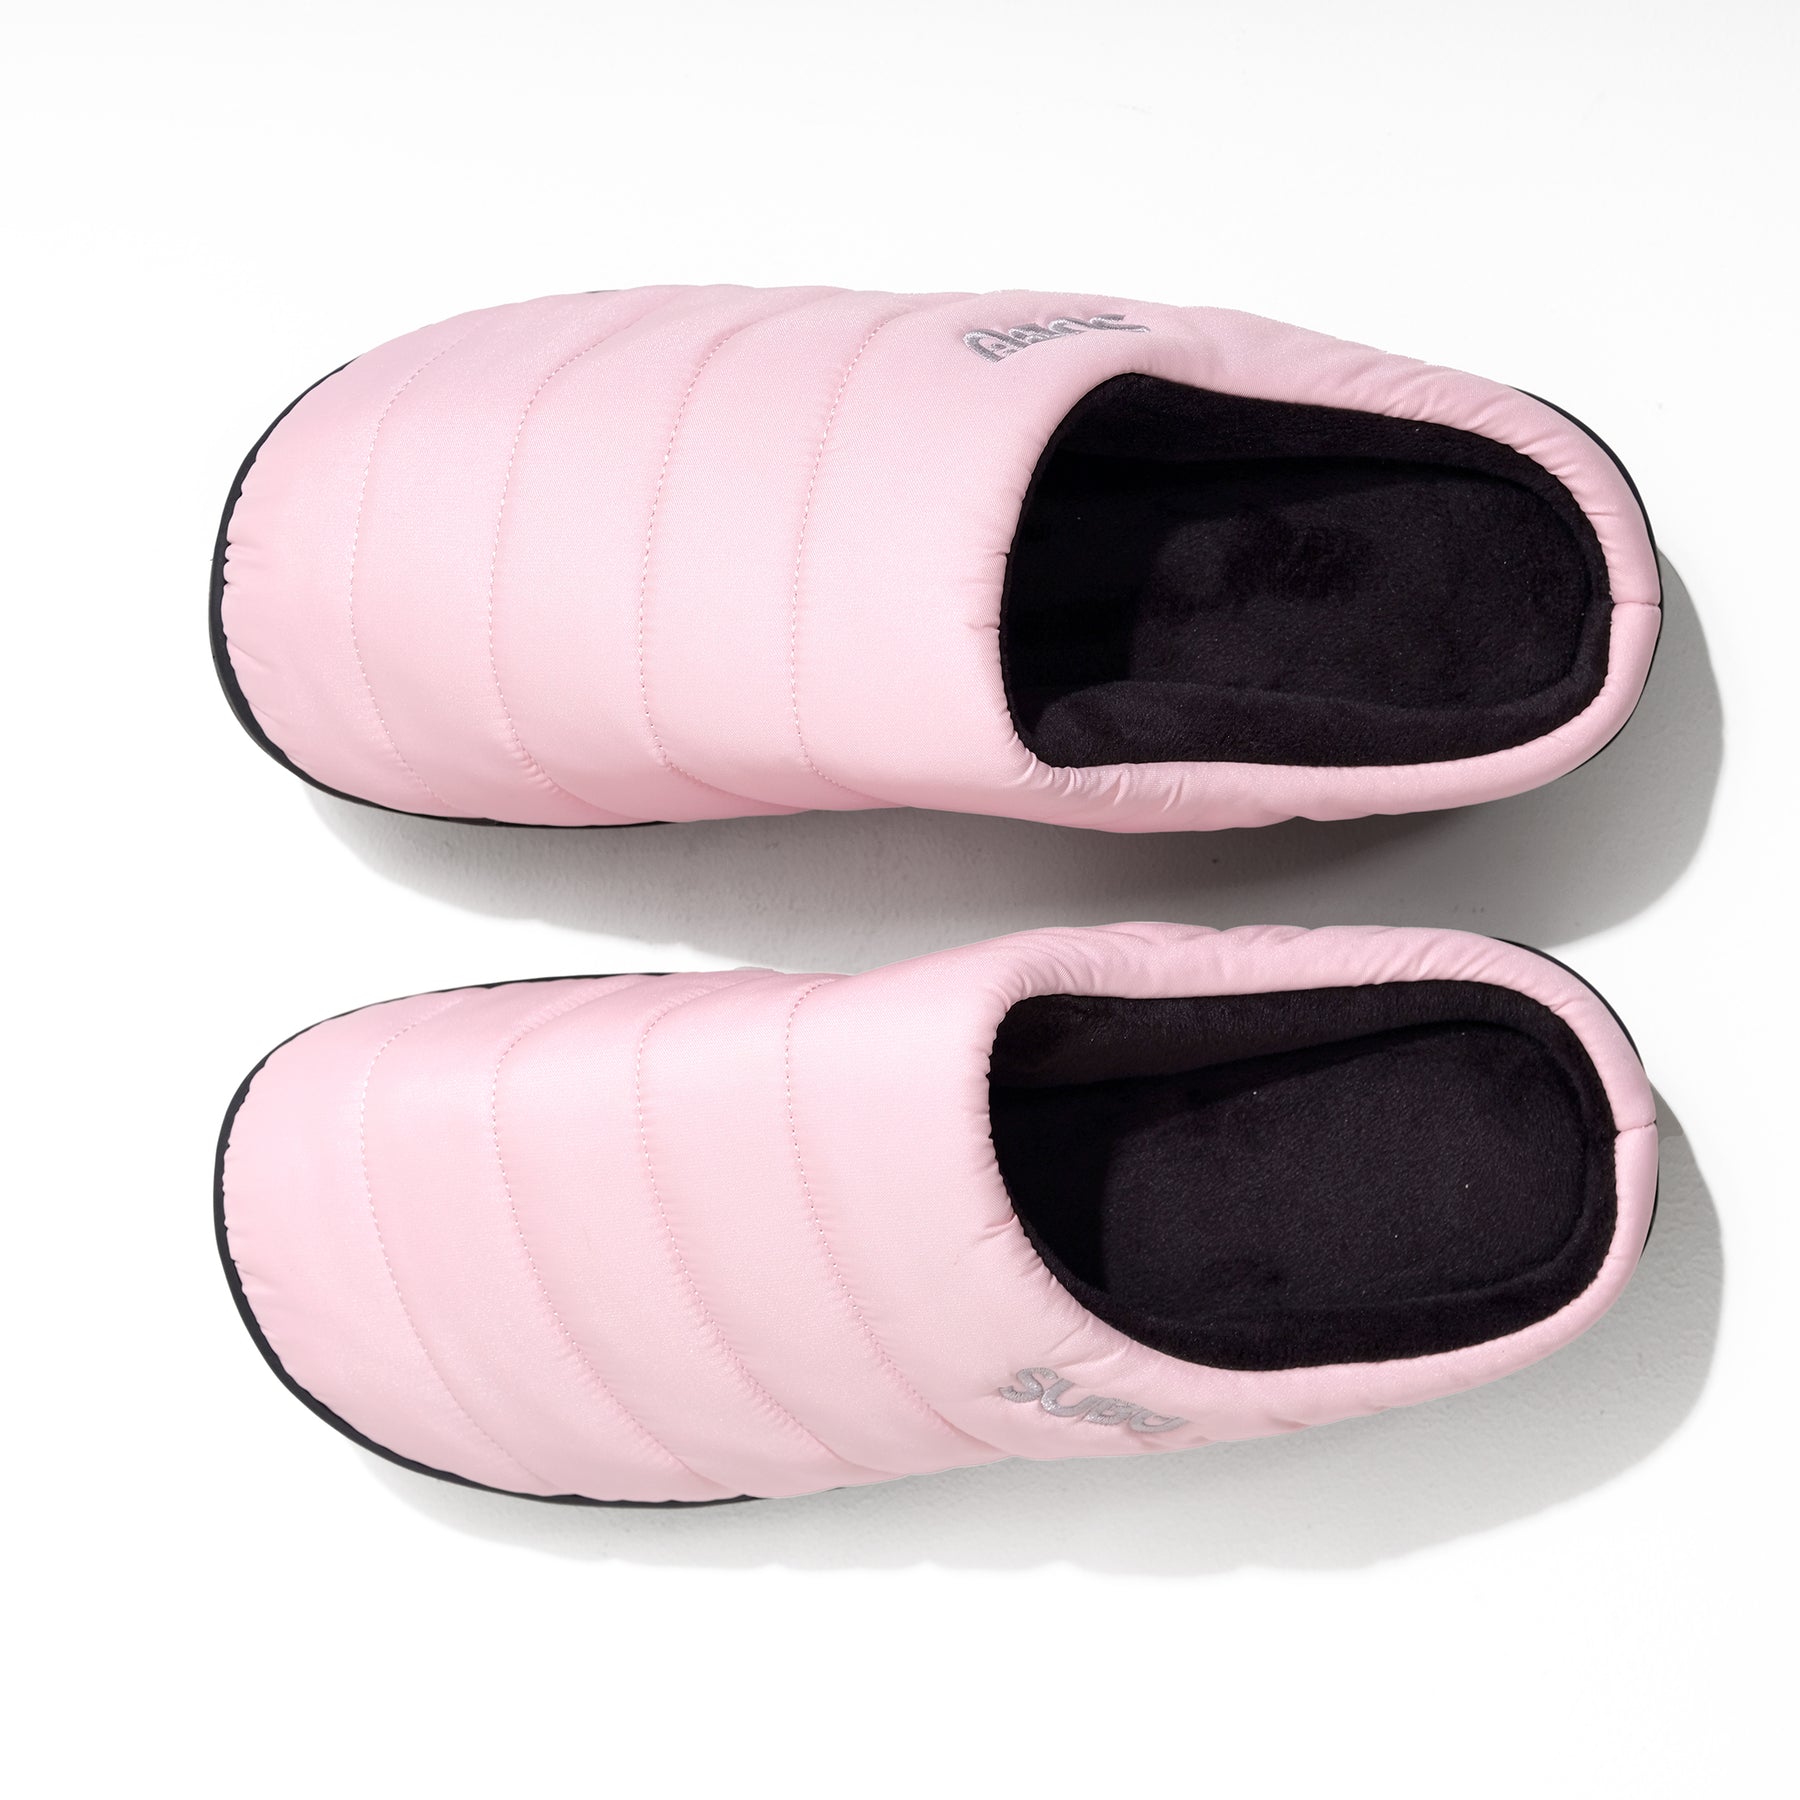 AMEICO - Official US Distributor of SUBU - Fall & Winter Slippers - Pink